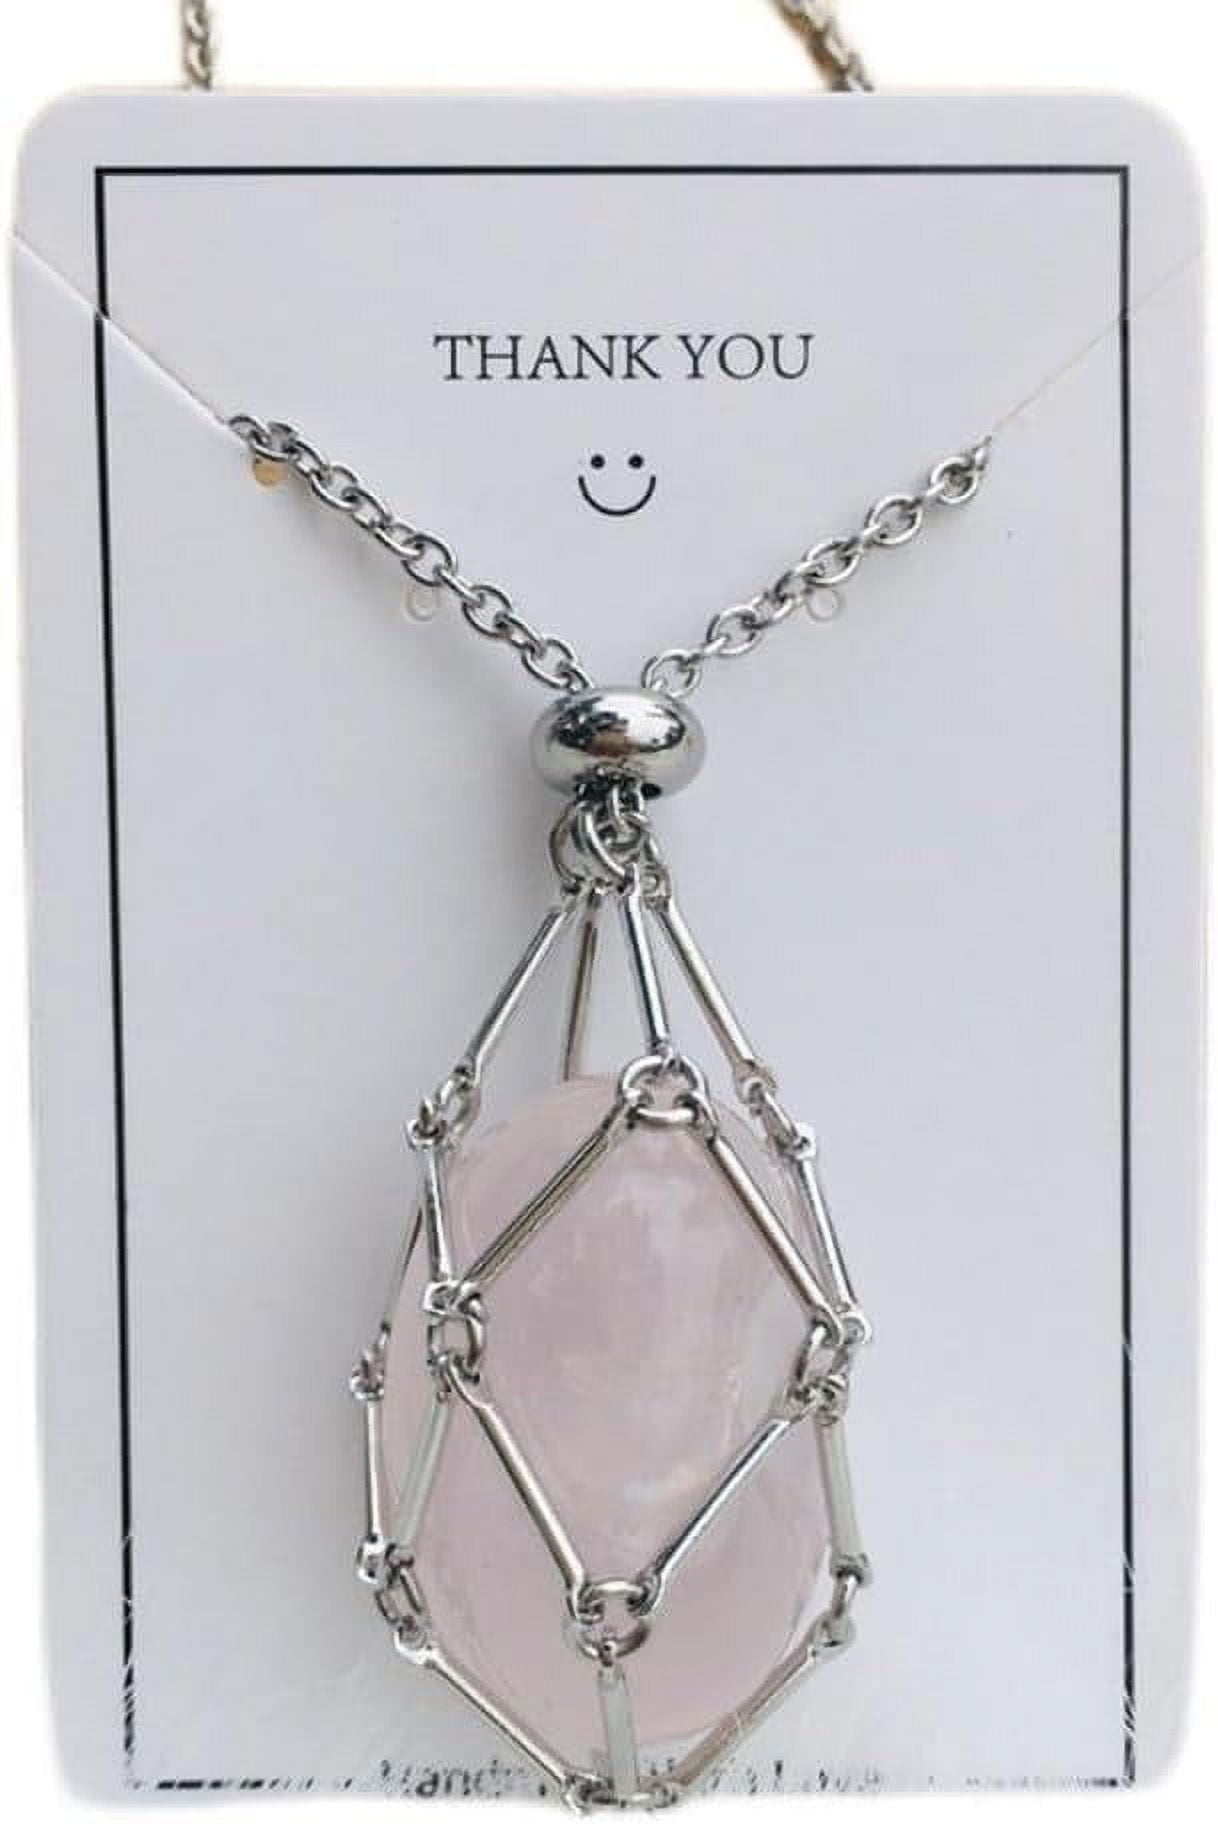 Interchangeable Crystal Holder Cage Necklace Stainless Steel Stone Holder  Necklace Women Men – the best products in the Joom Geek online store